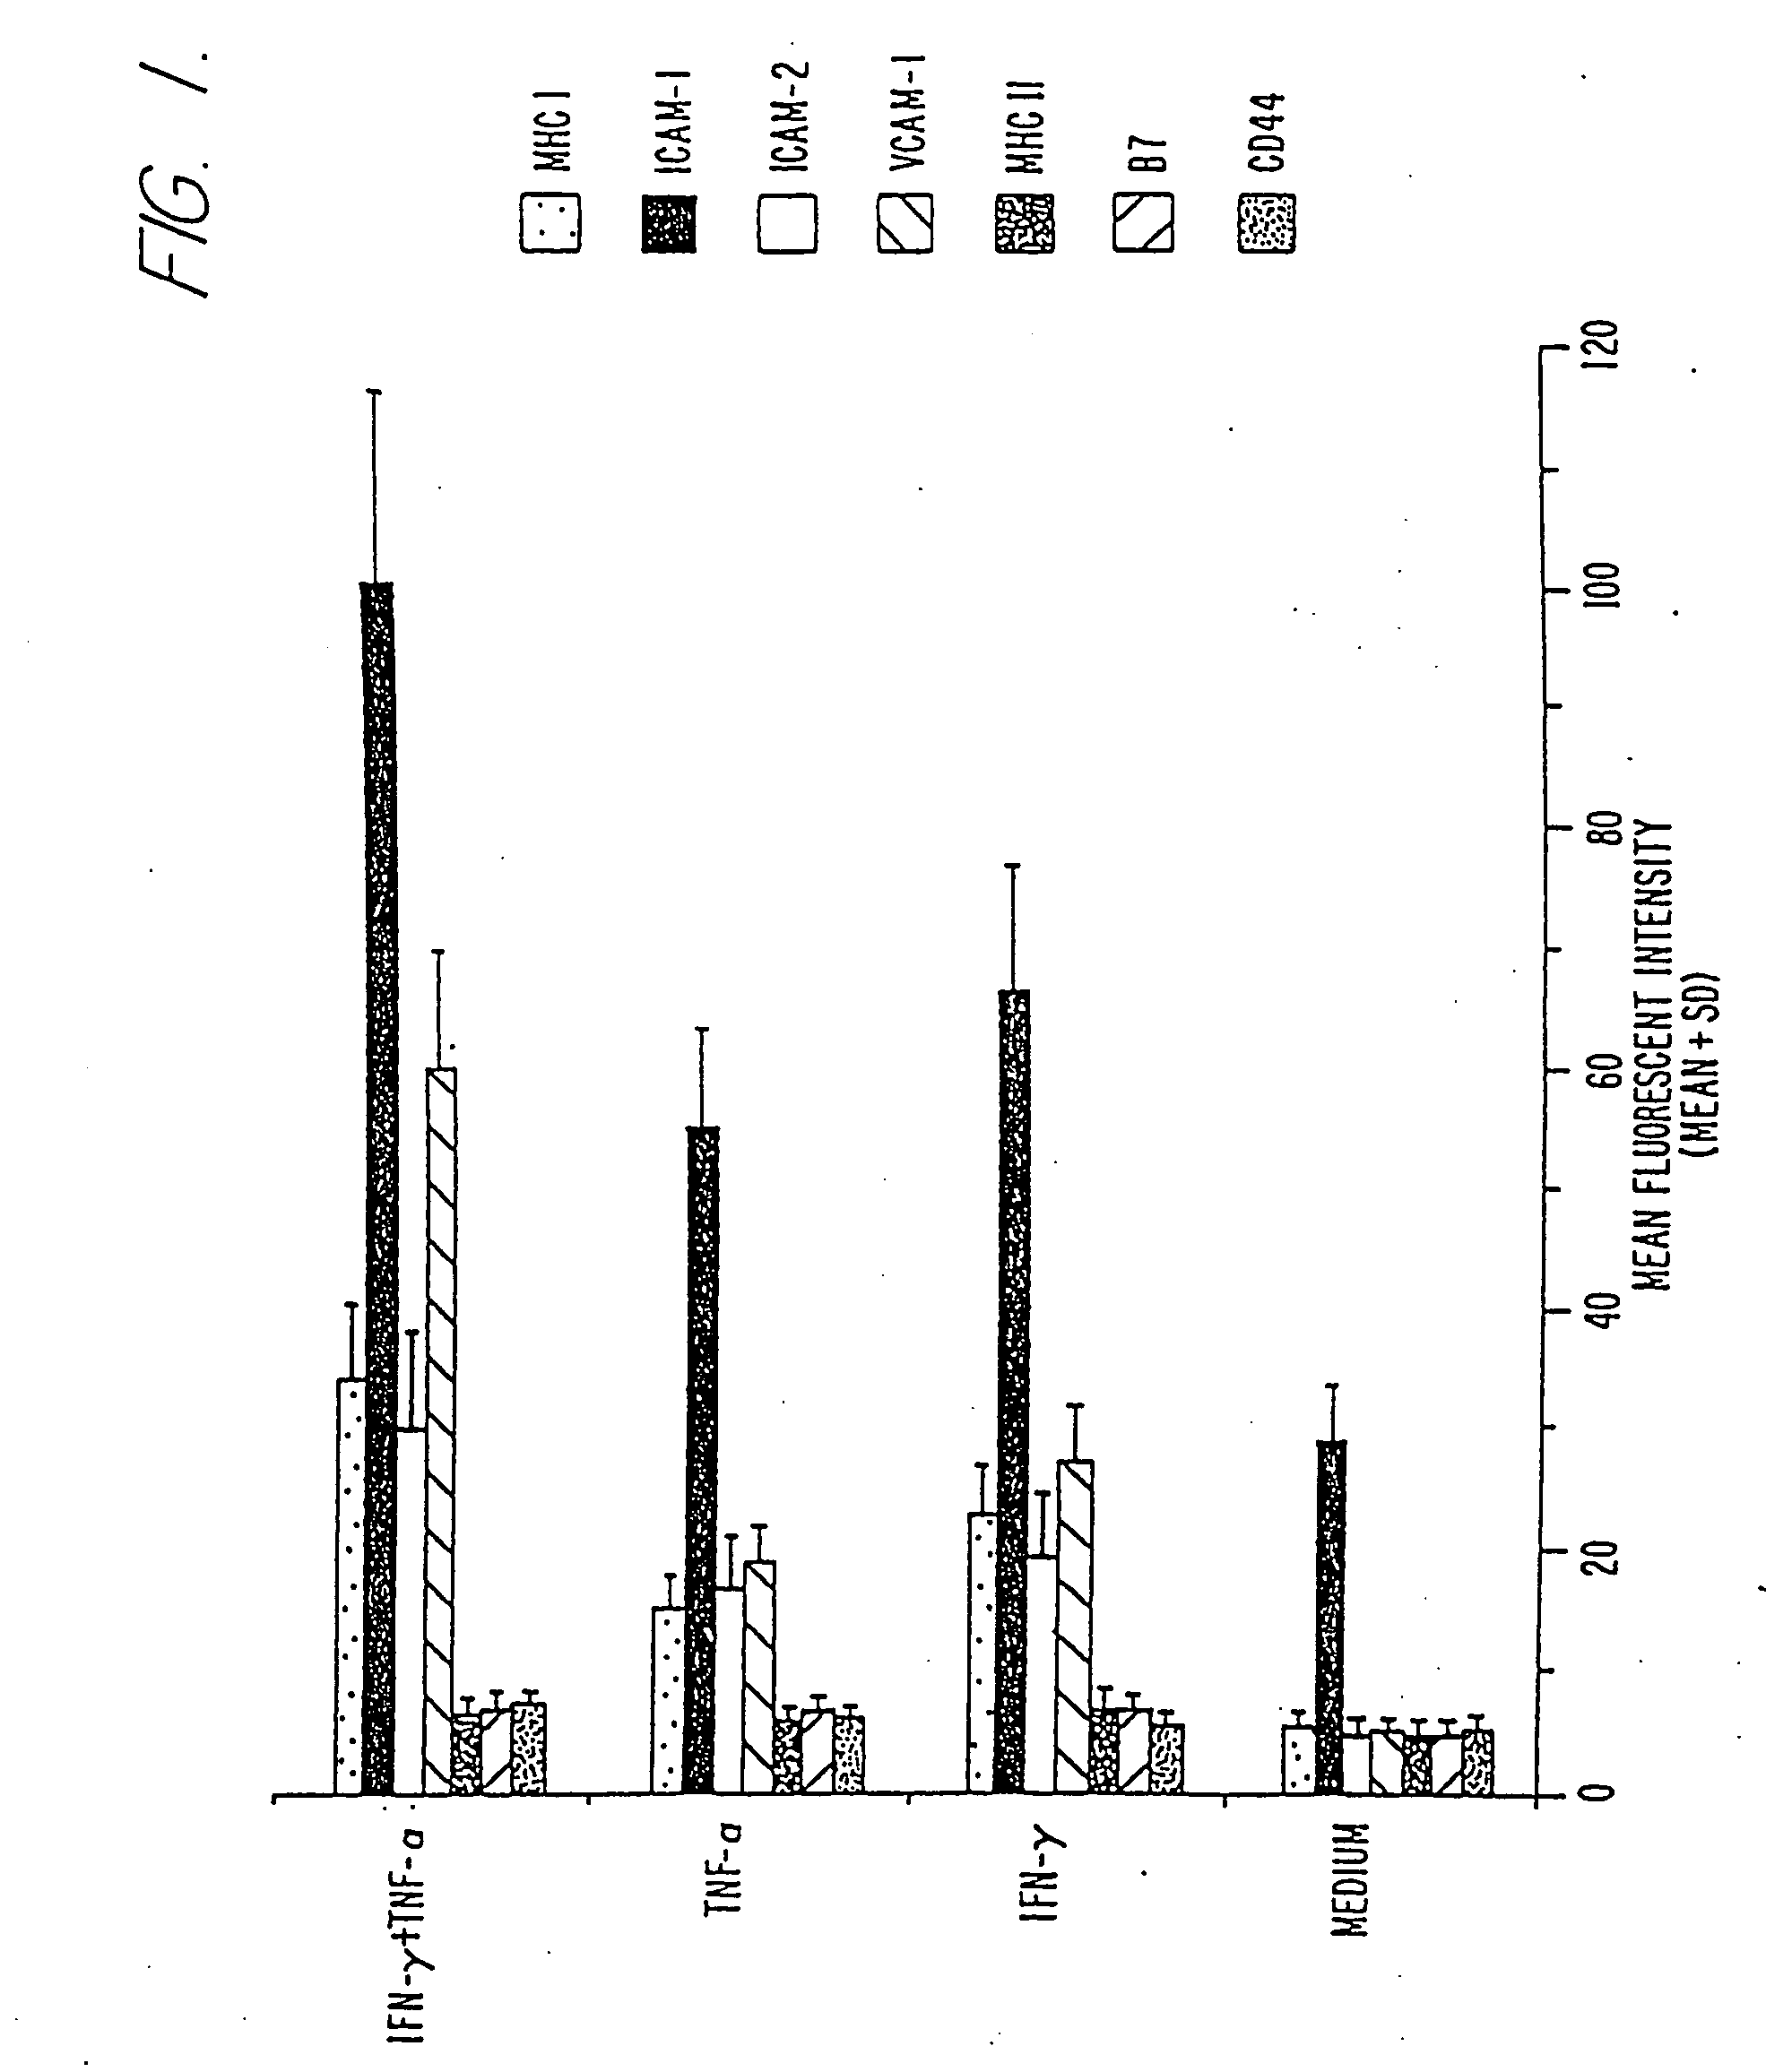 Cellular vaccines and immunotherapeutics and methods for their preparation